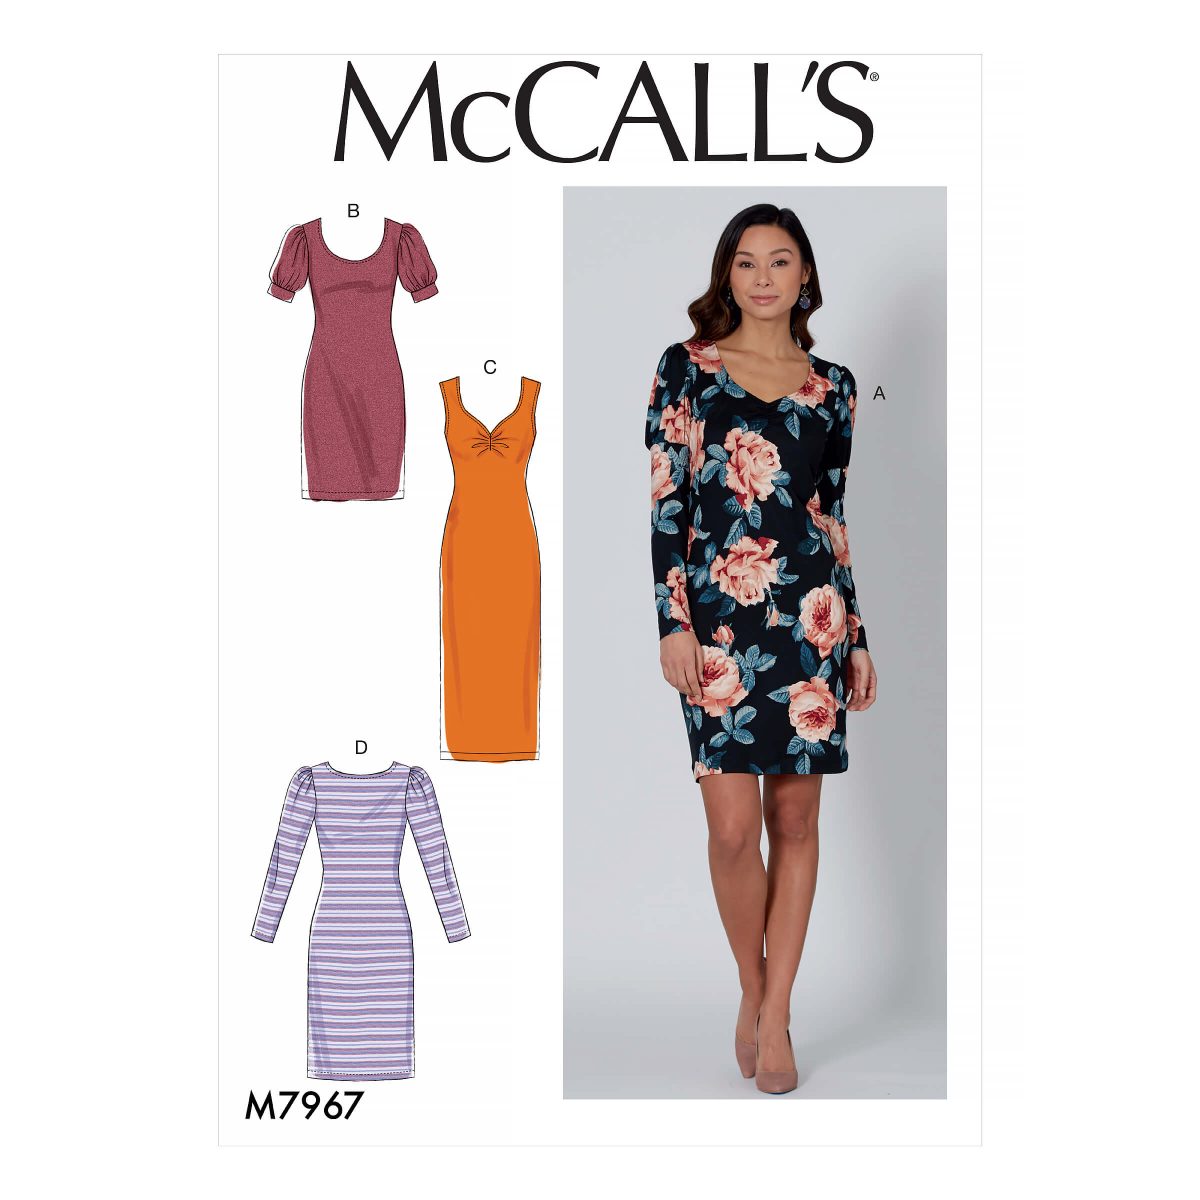 McCall's Sewing Pattern M7967 Misses' Dresses